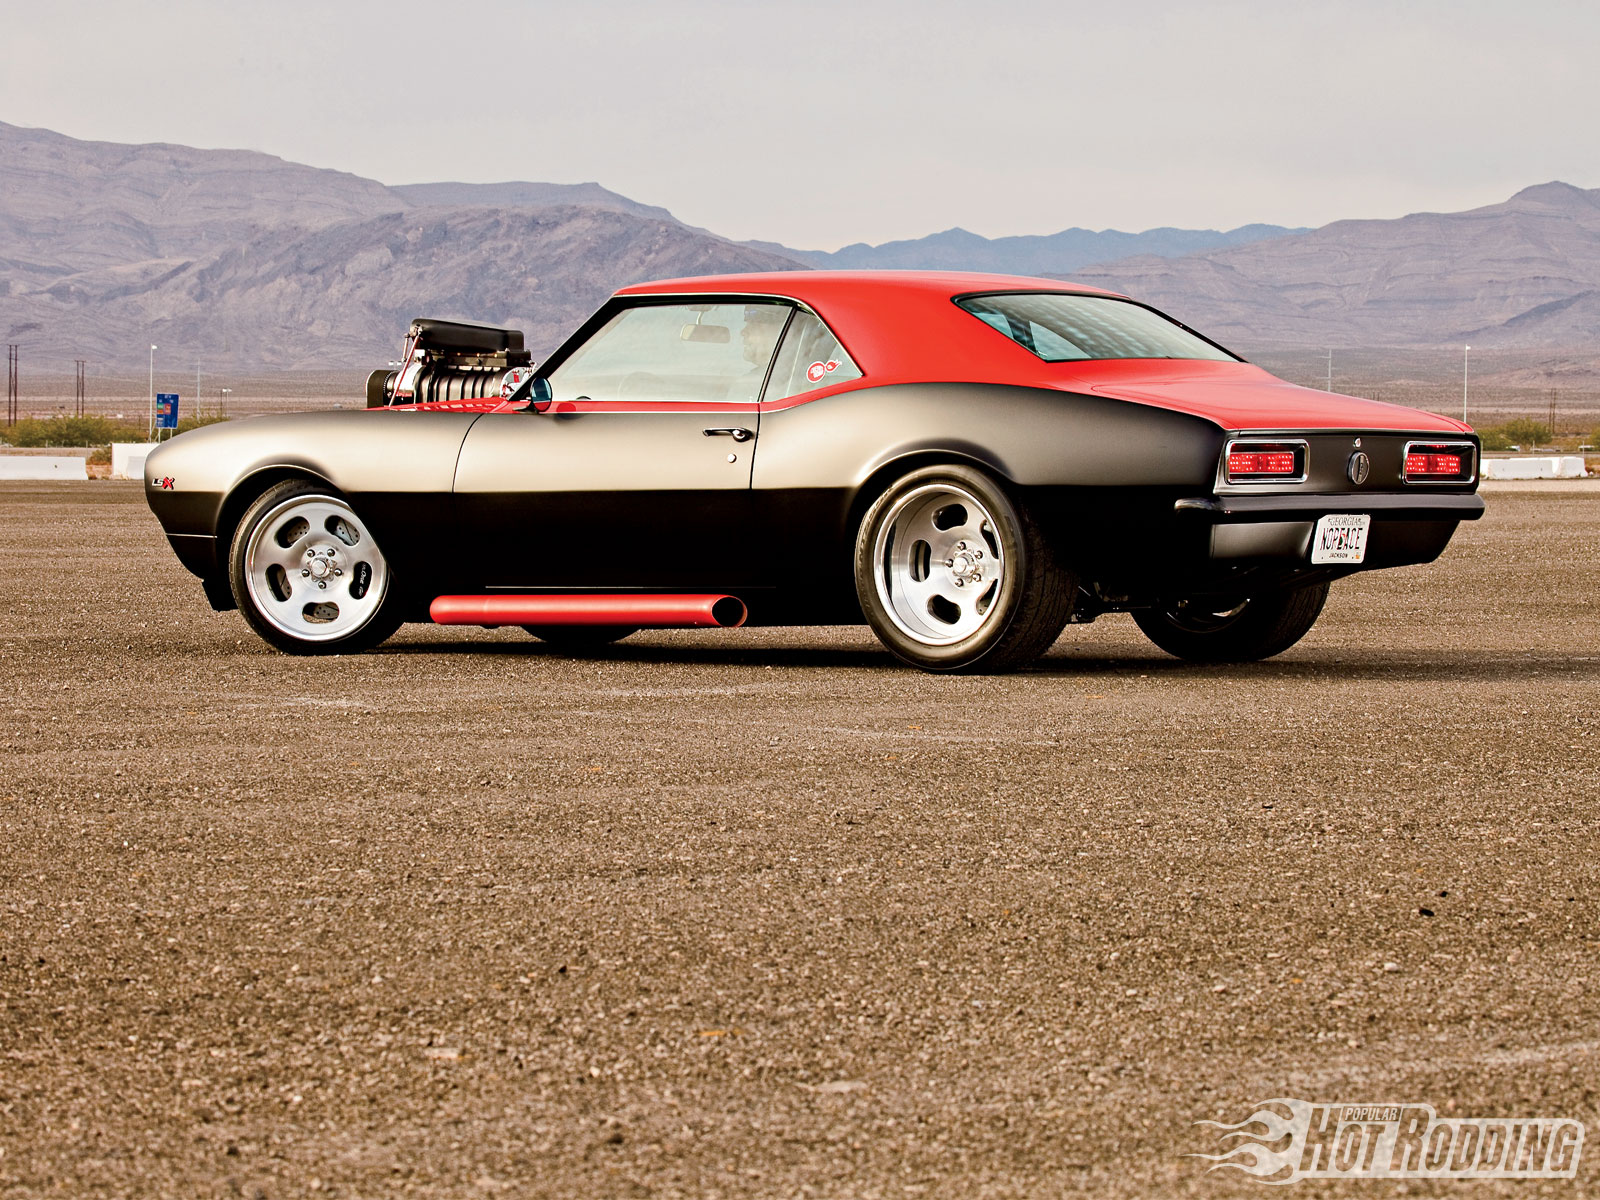 1968, Chevy, Camaro, Hot, Rod, Blown, Blower, Engine, Muscle, Cars Wallpaper